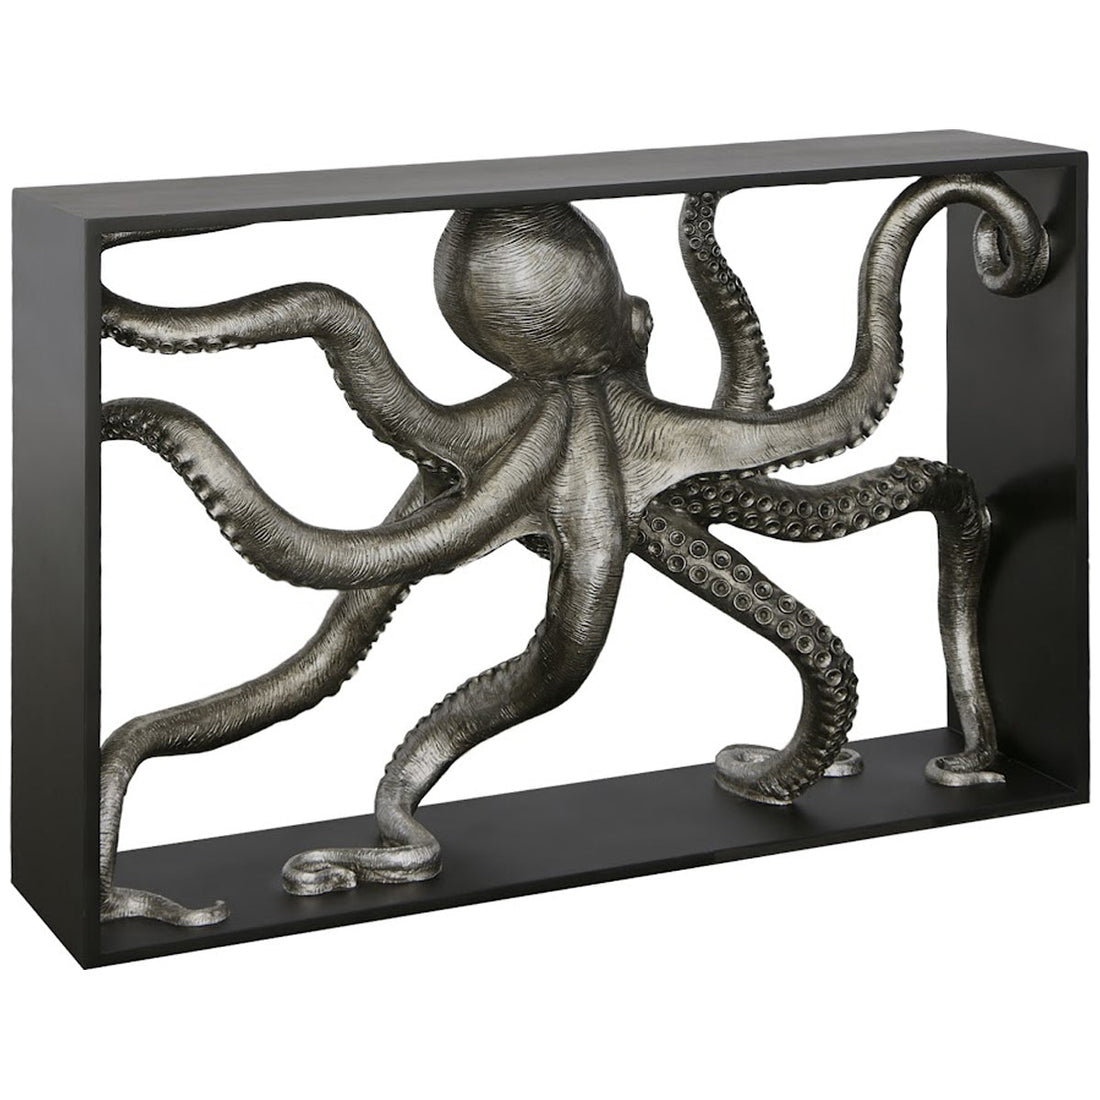 Phillips Collection Octo Framed Console Table